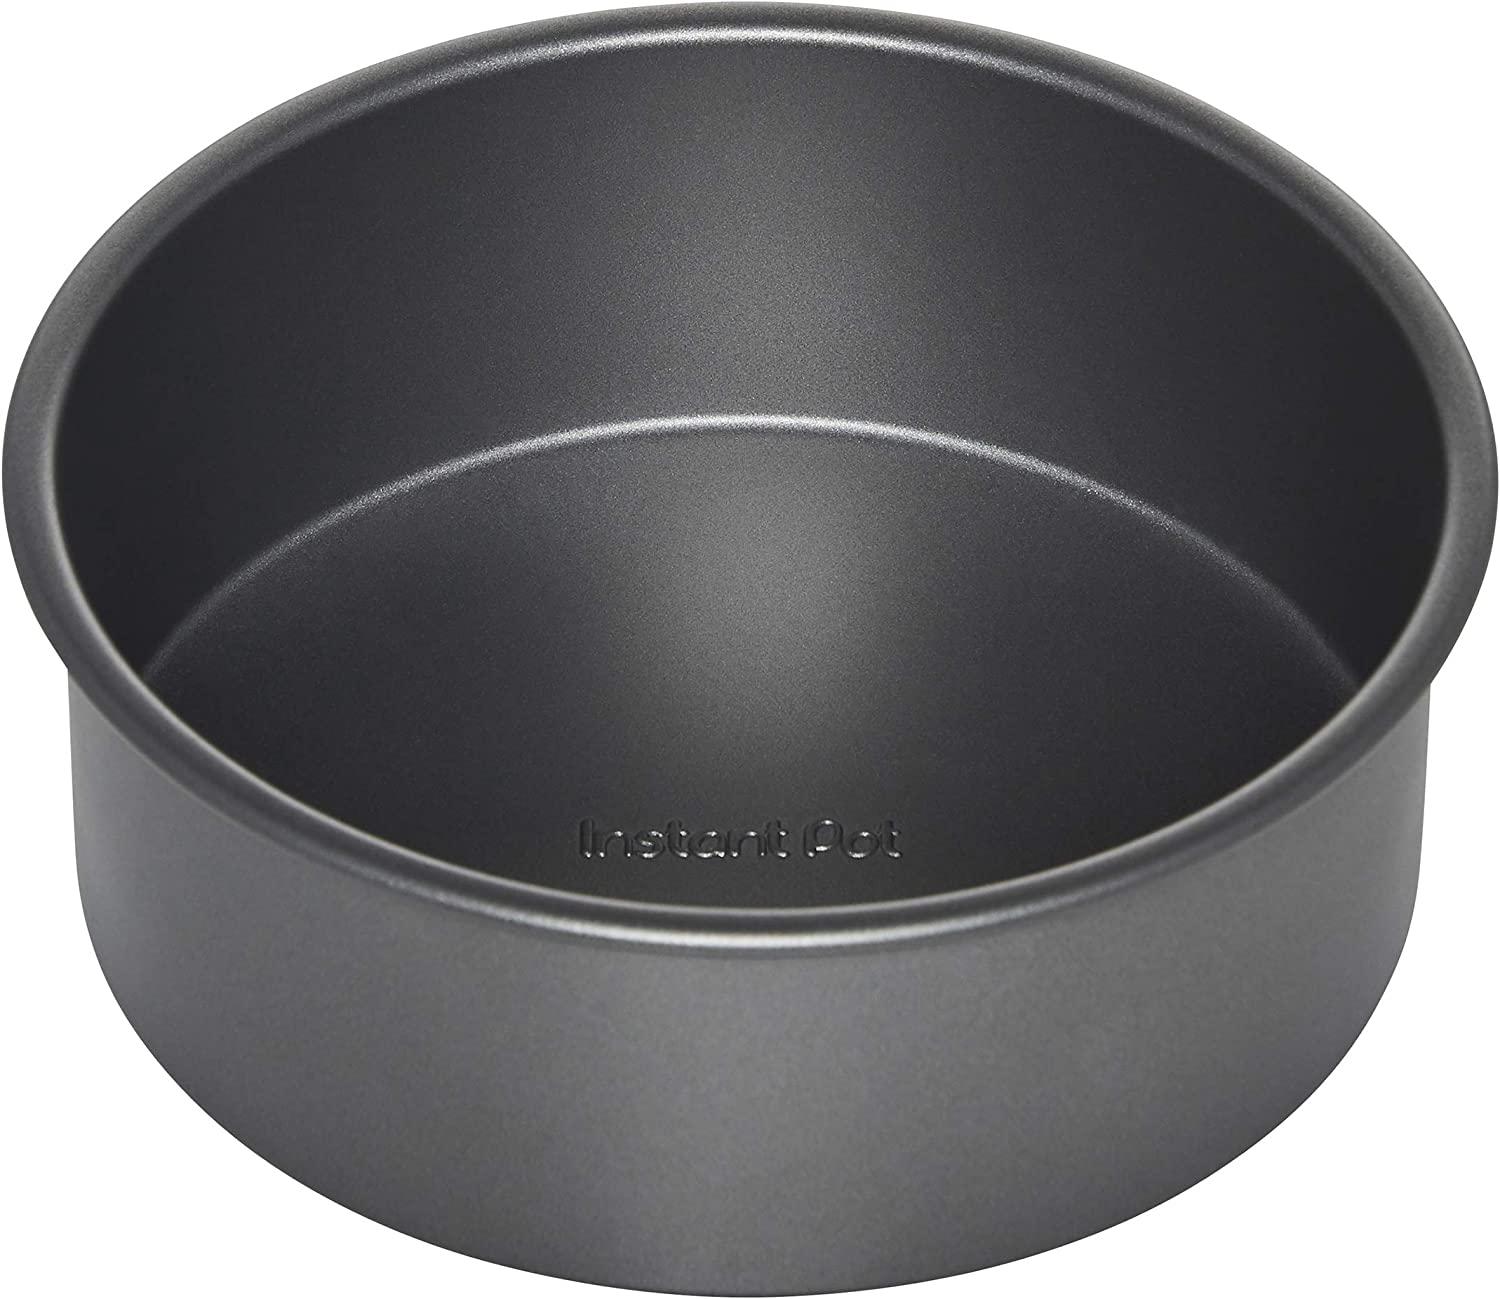 Instant Pot Official Round Cake Pan for $7.22